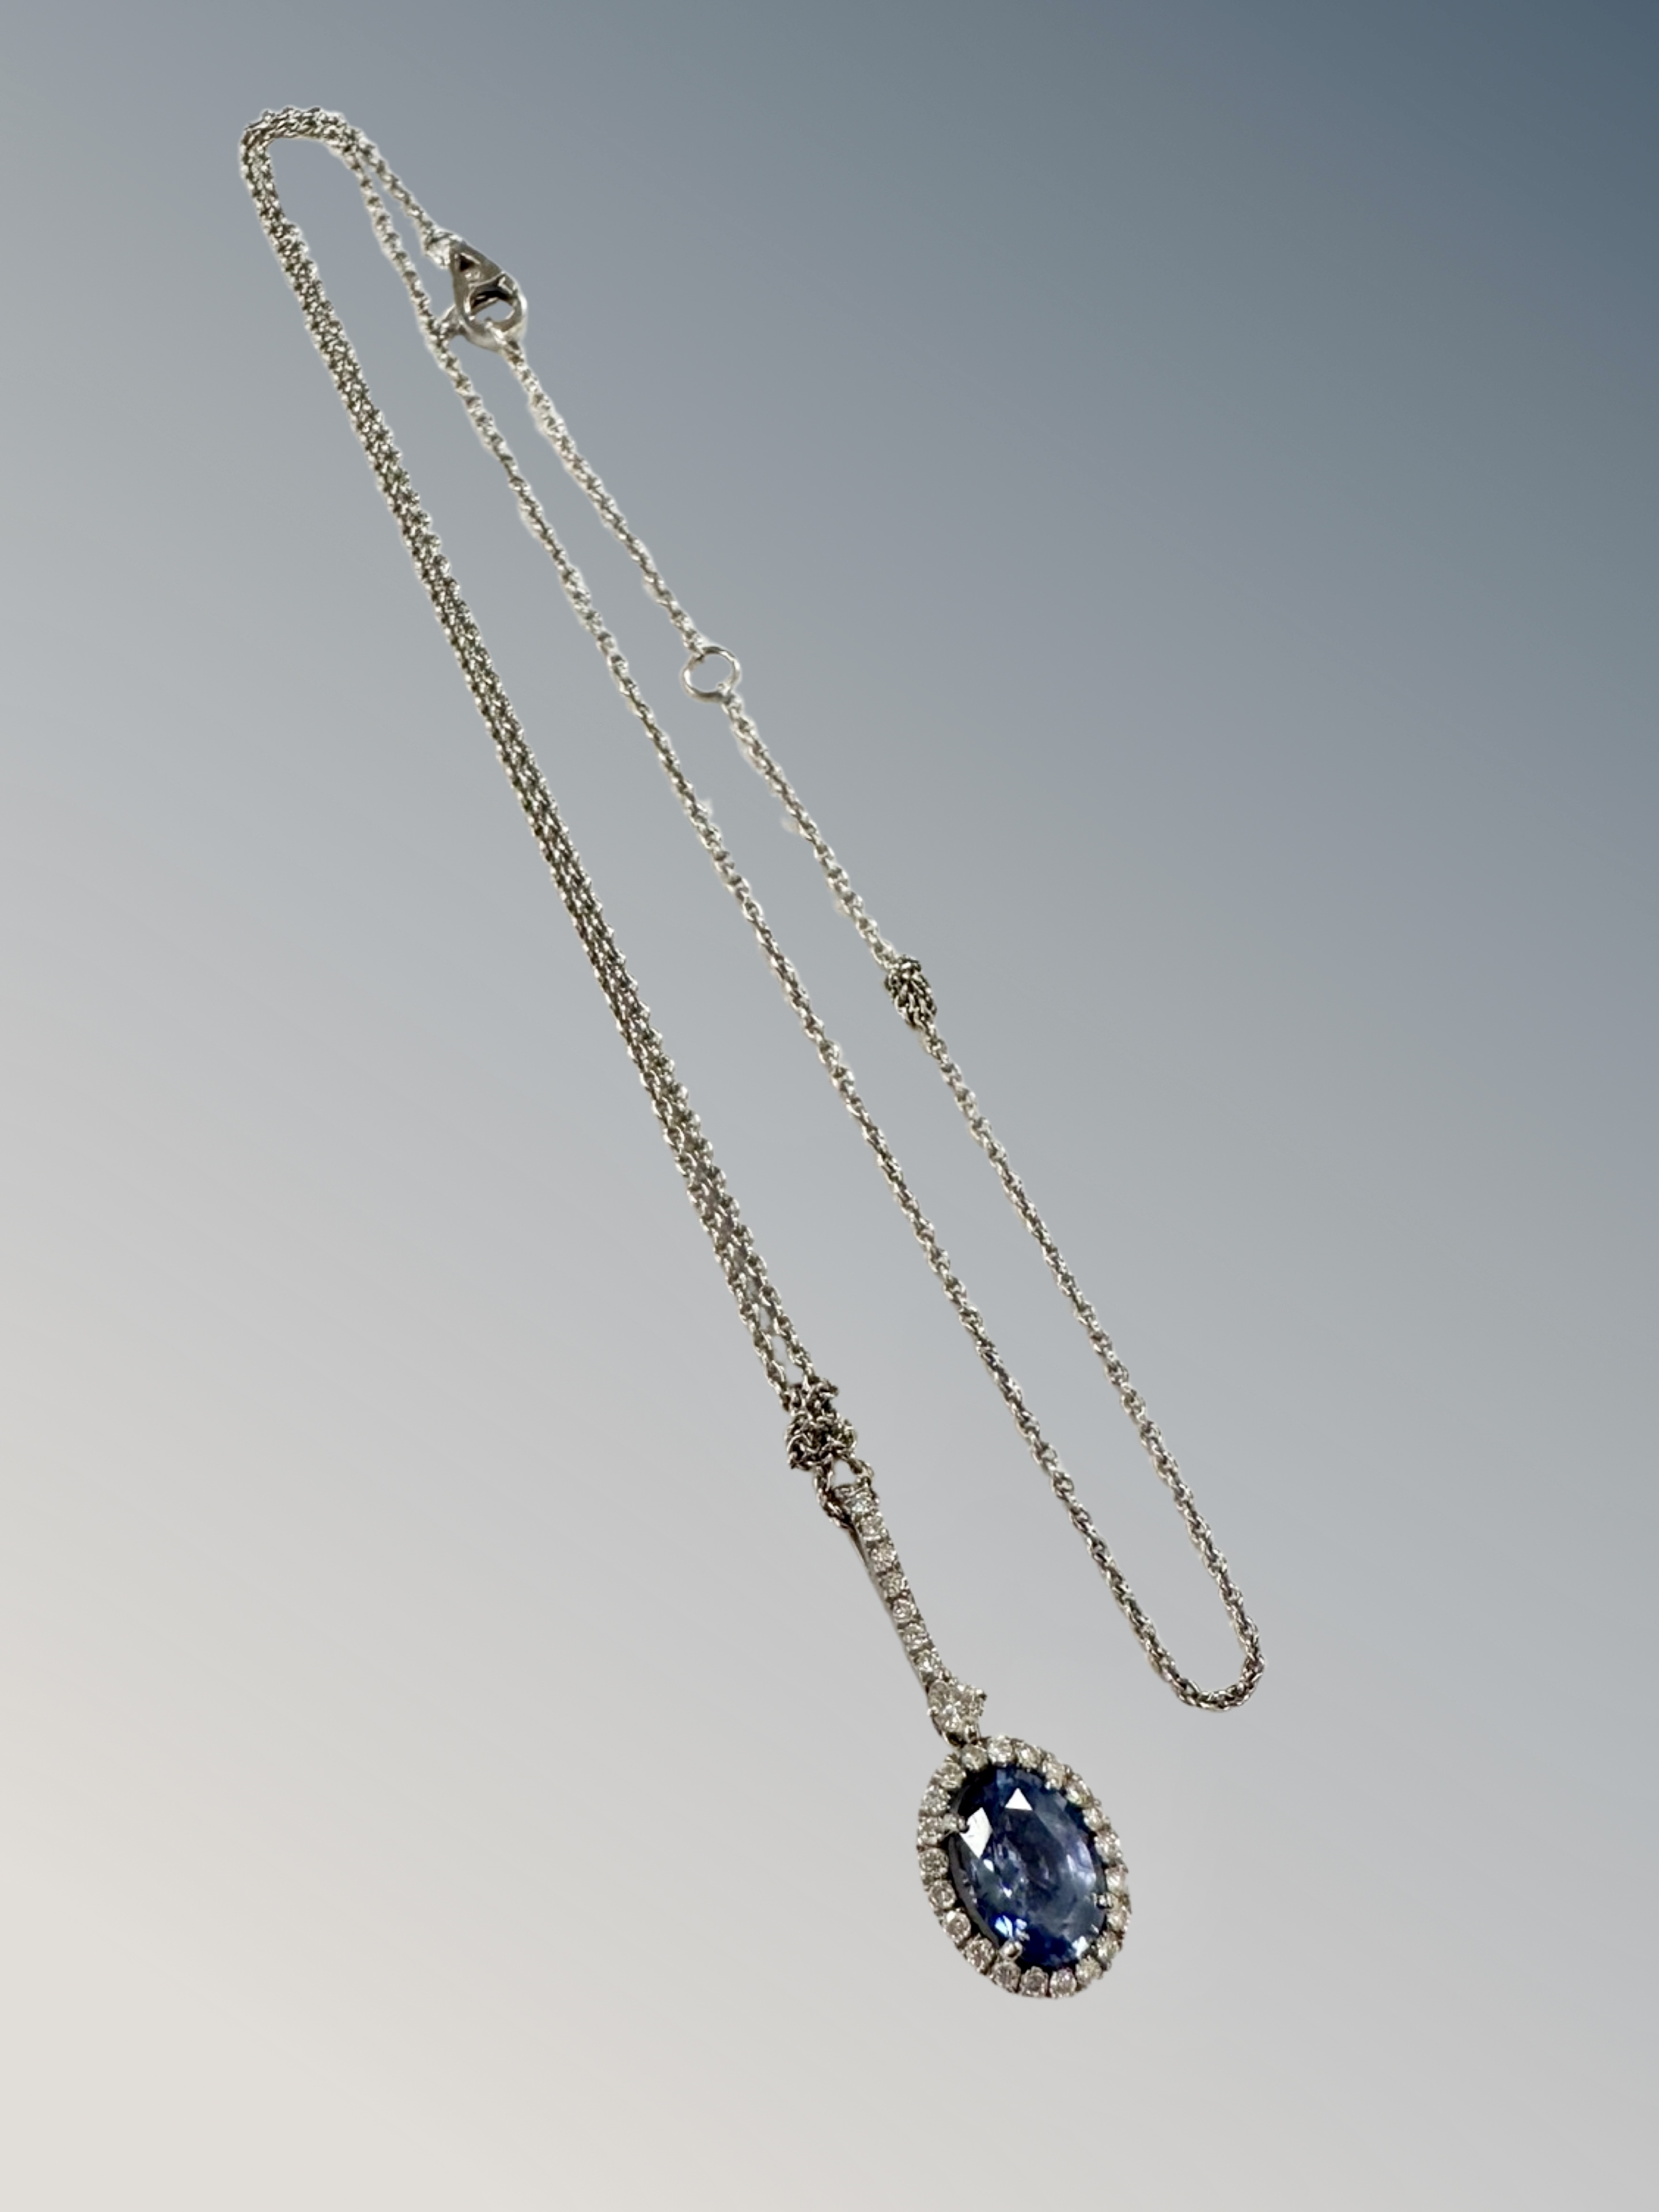 A platinum sapphire and diamond cluster pendant suspended on white metal chain CONDITION